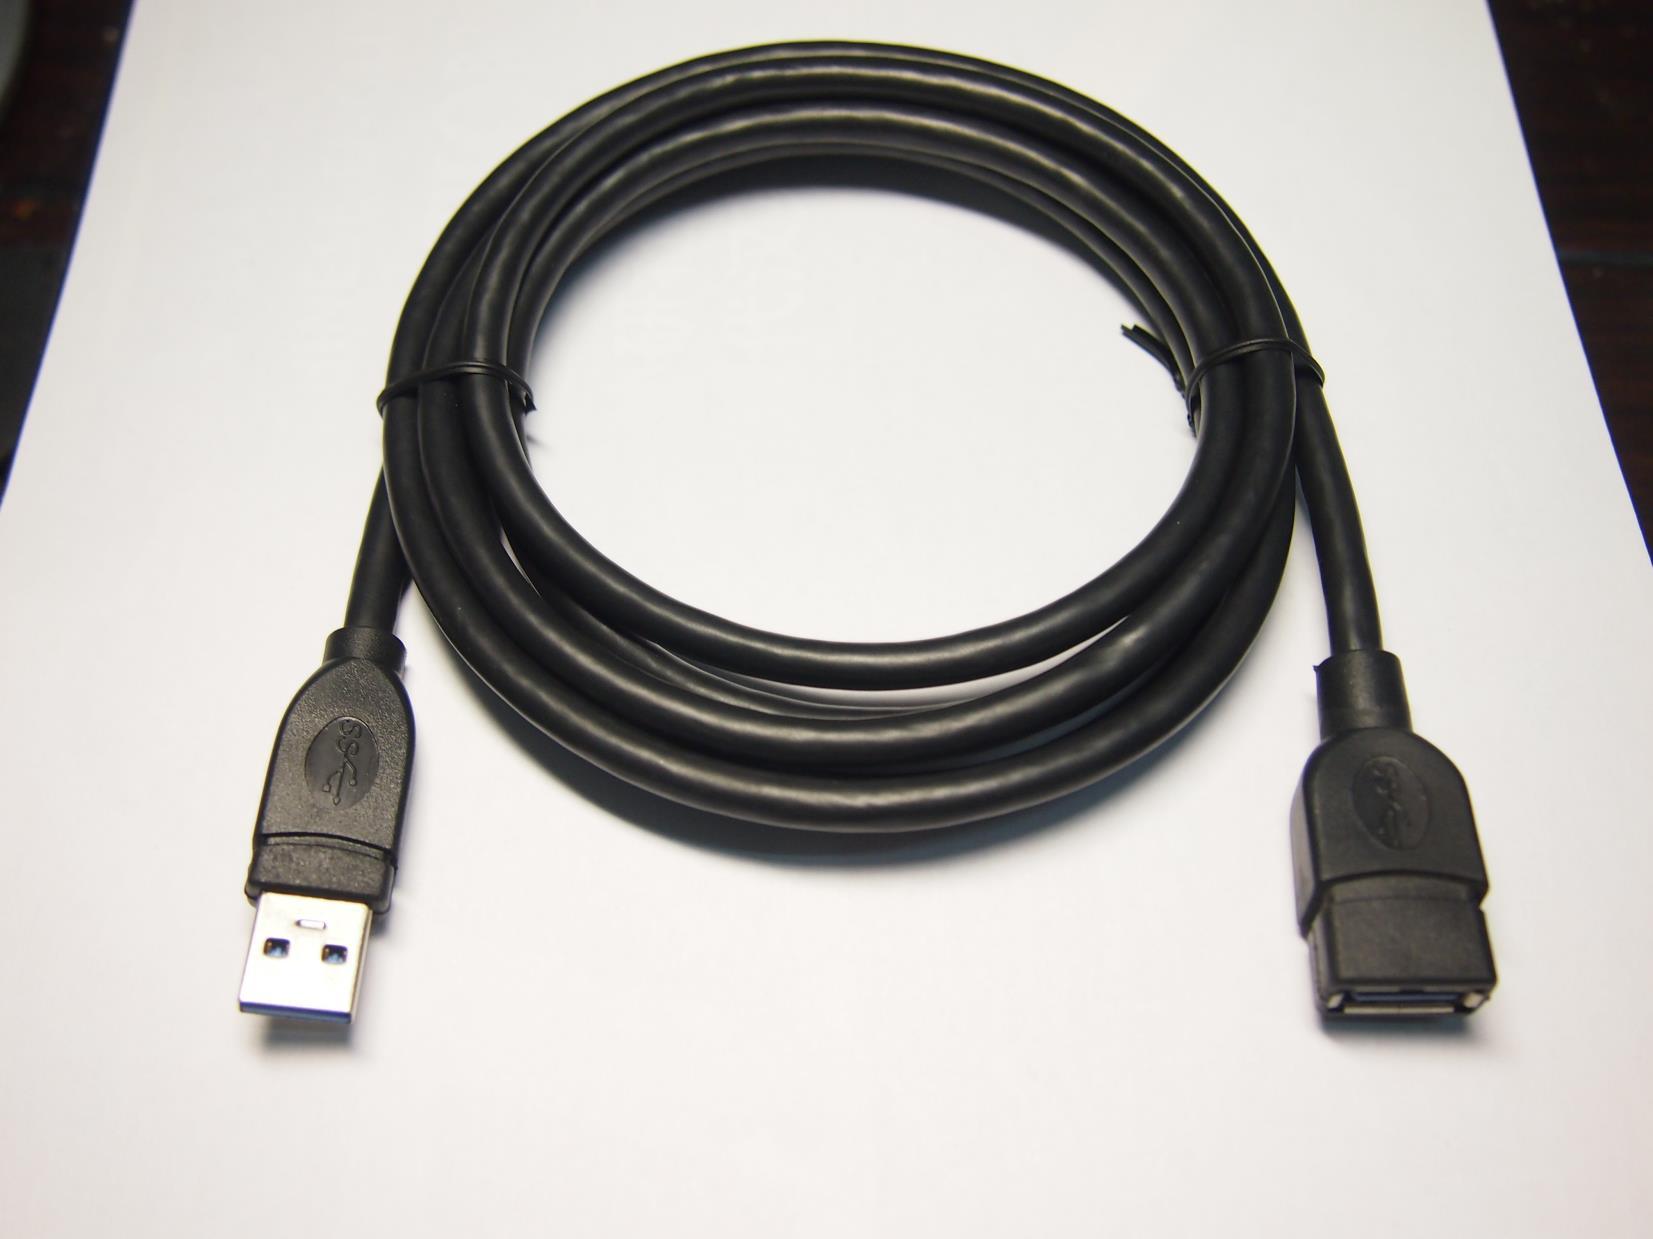 Popular USB Male to Female Cable